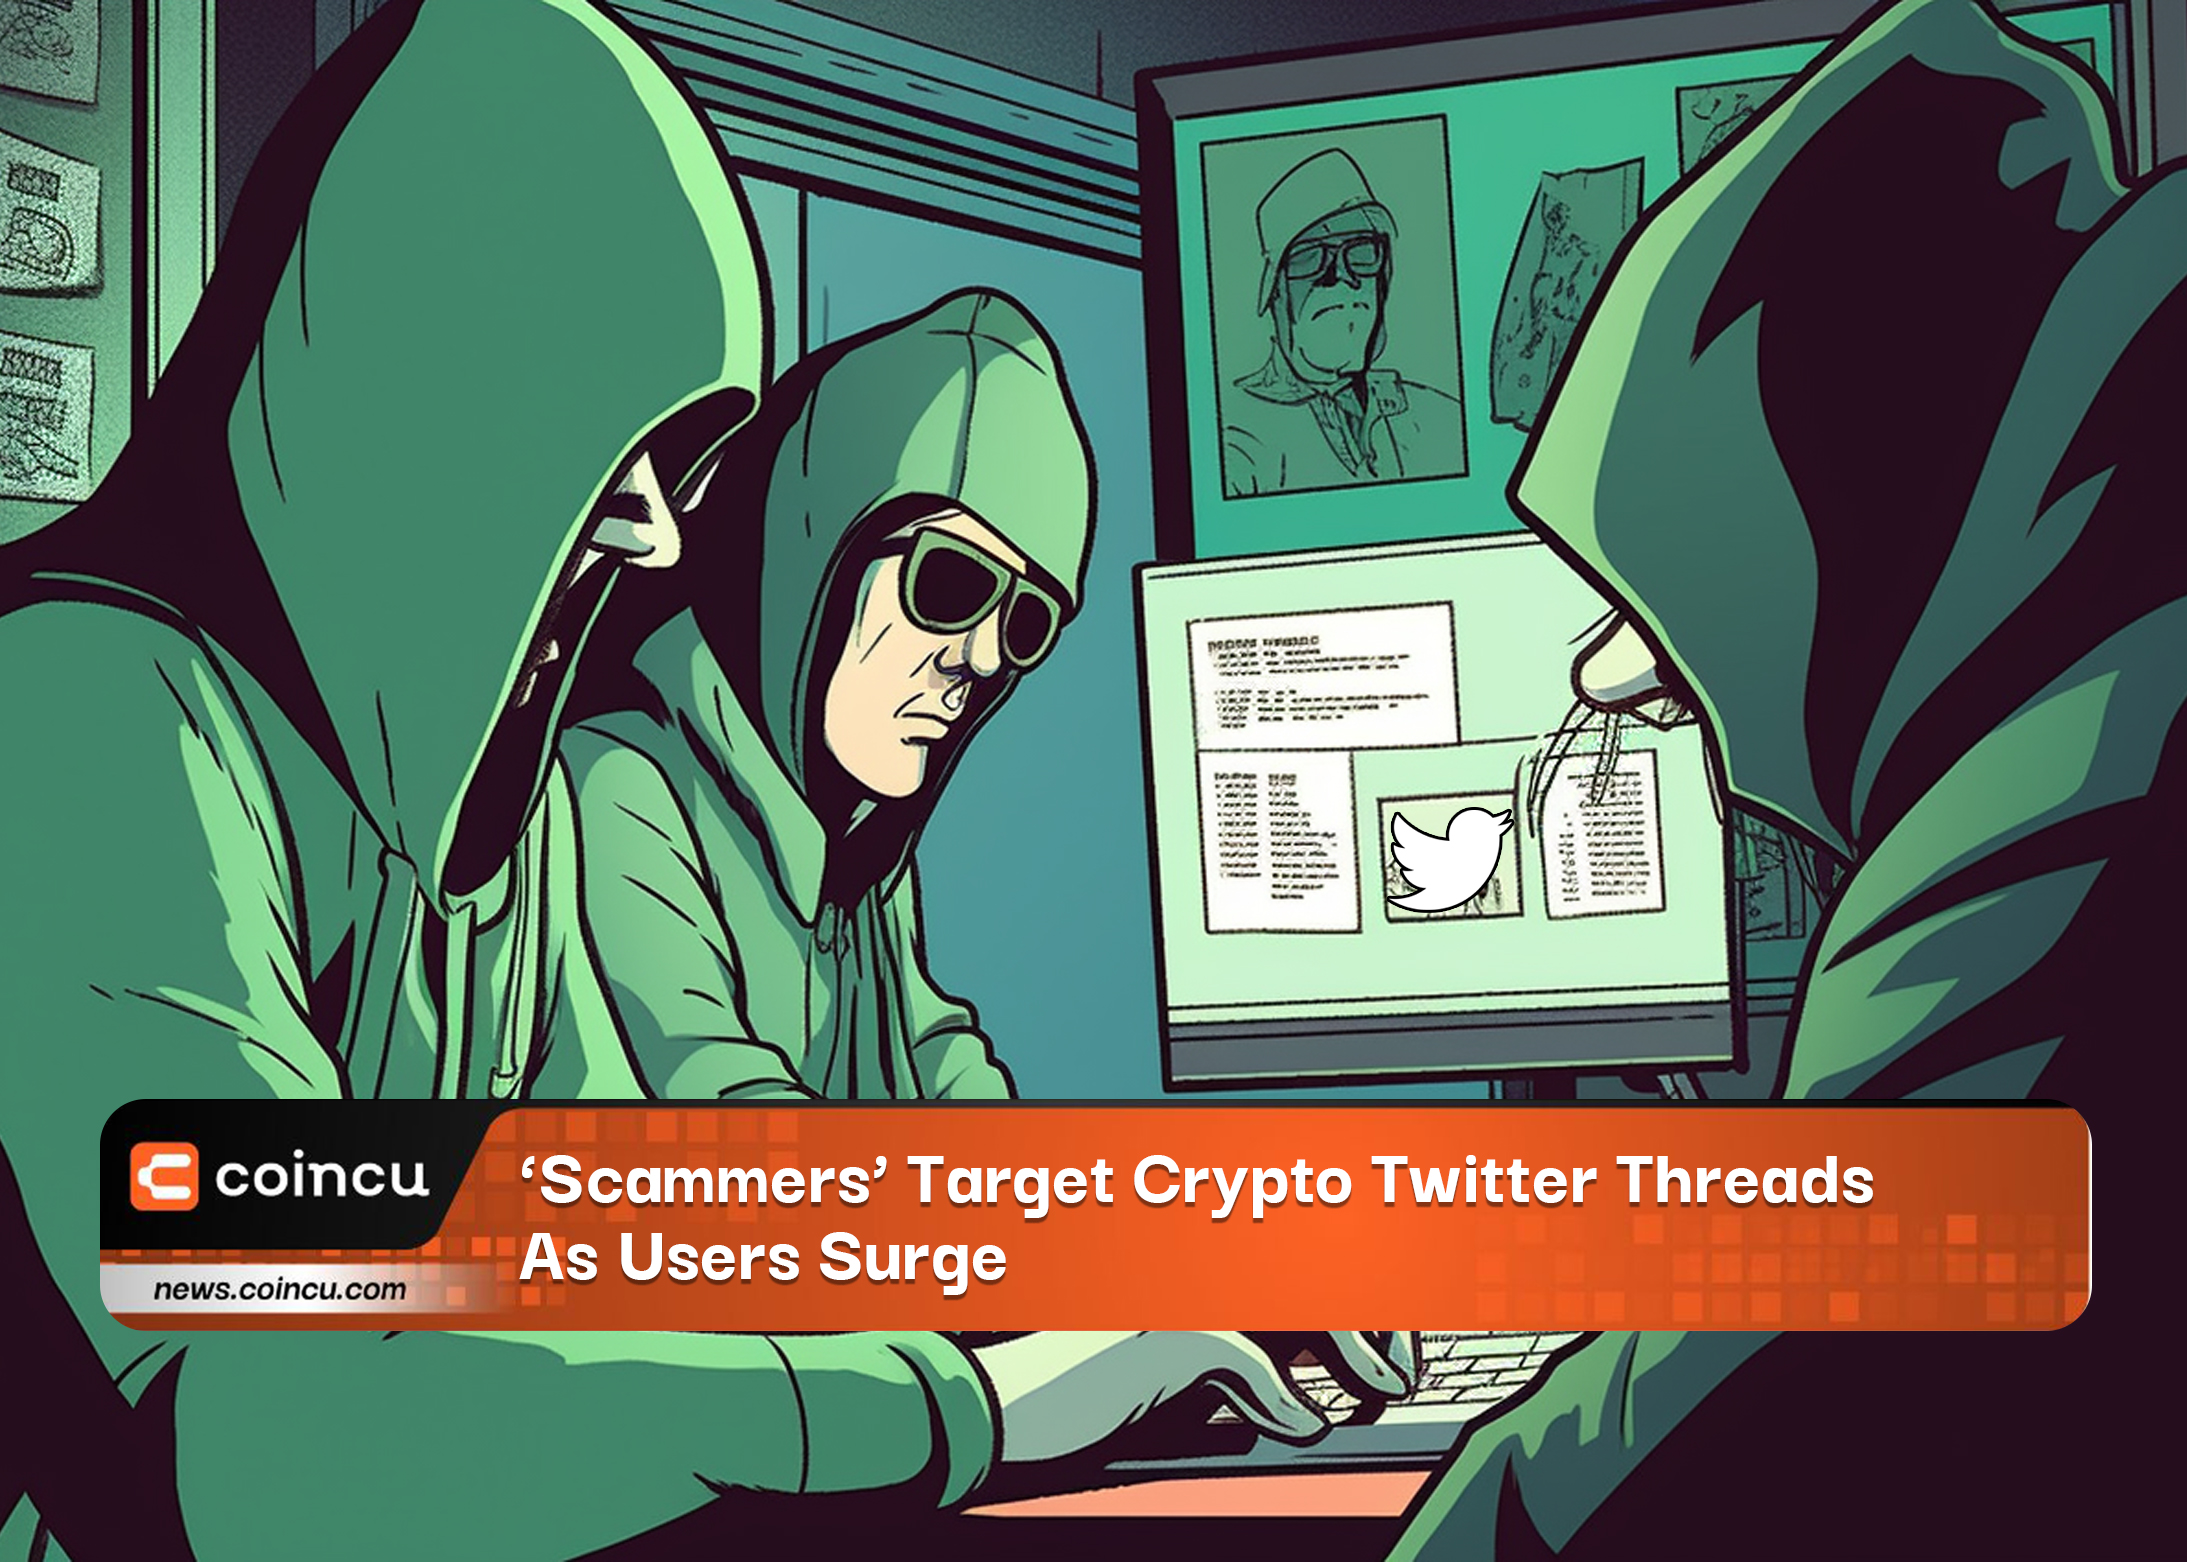 ‘Scammers Target Crypto Twitter Threads As Users Surge